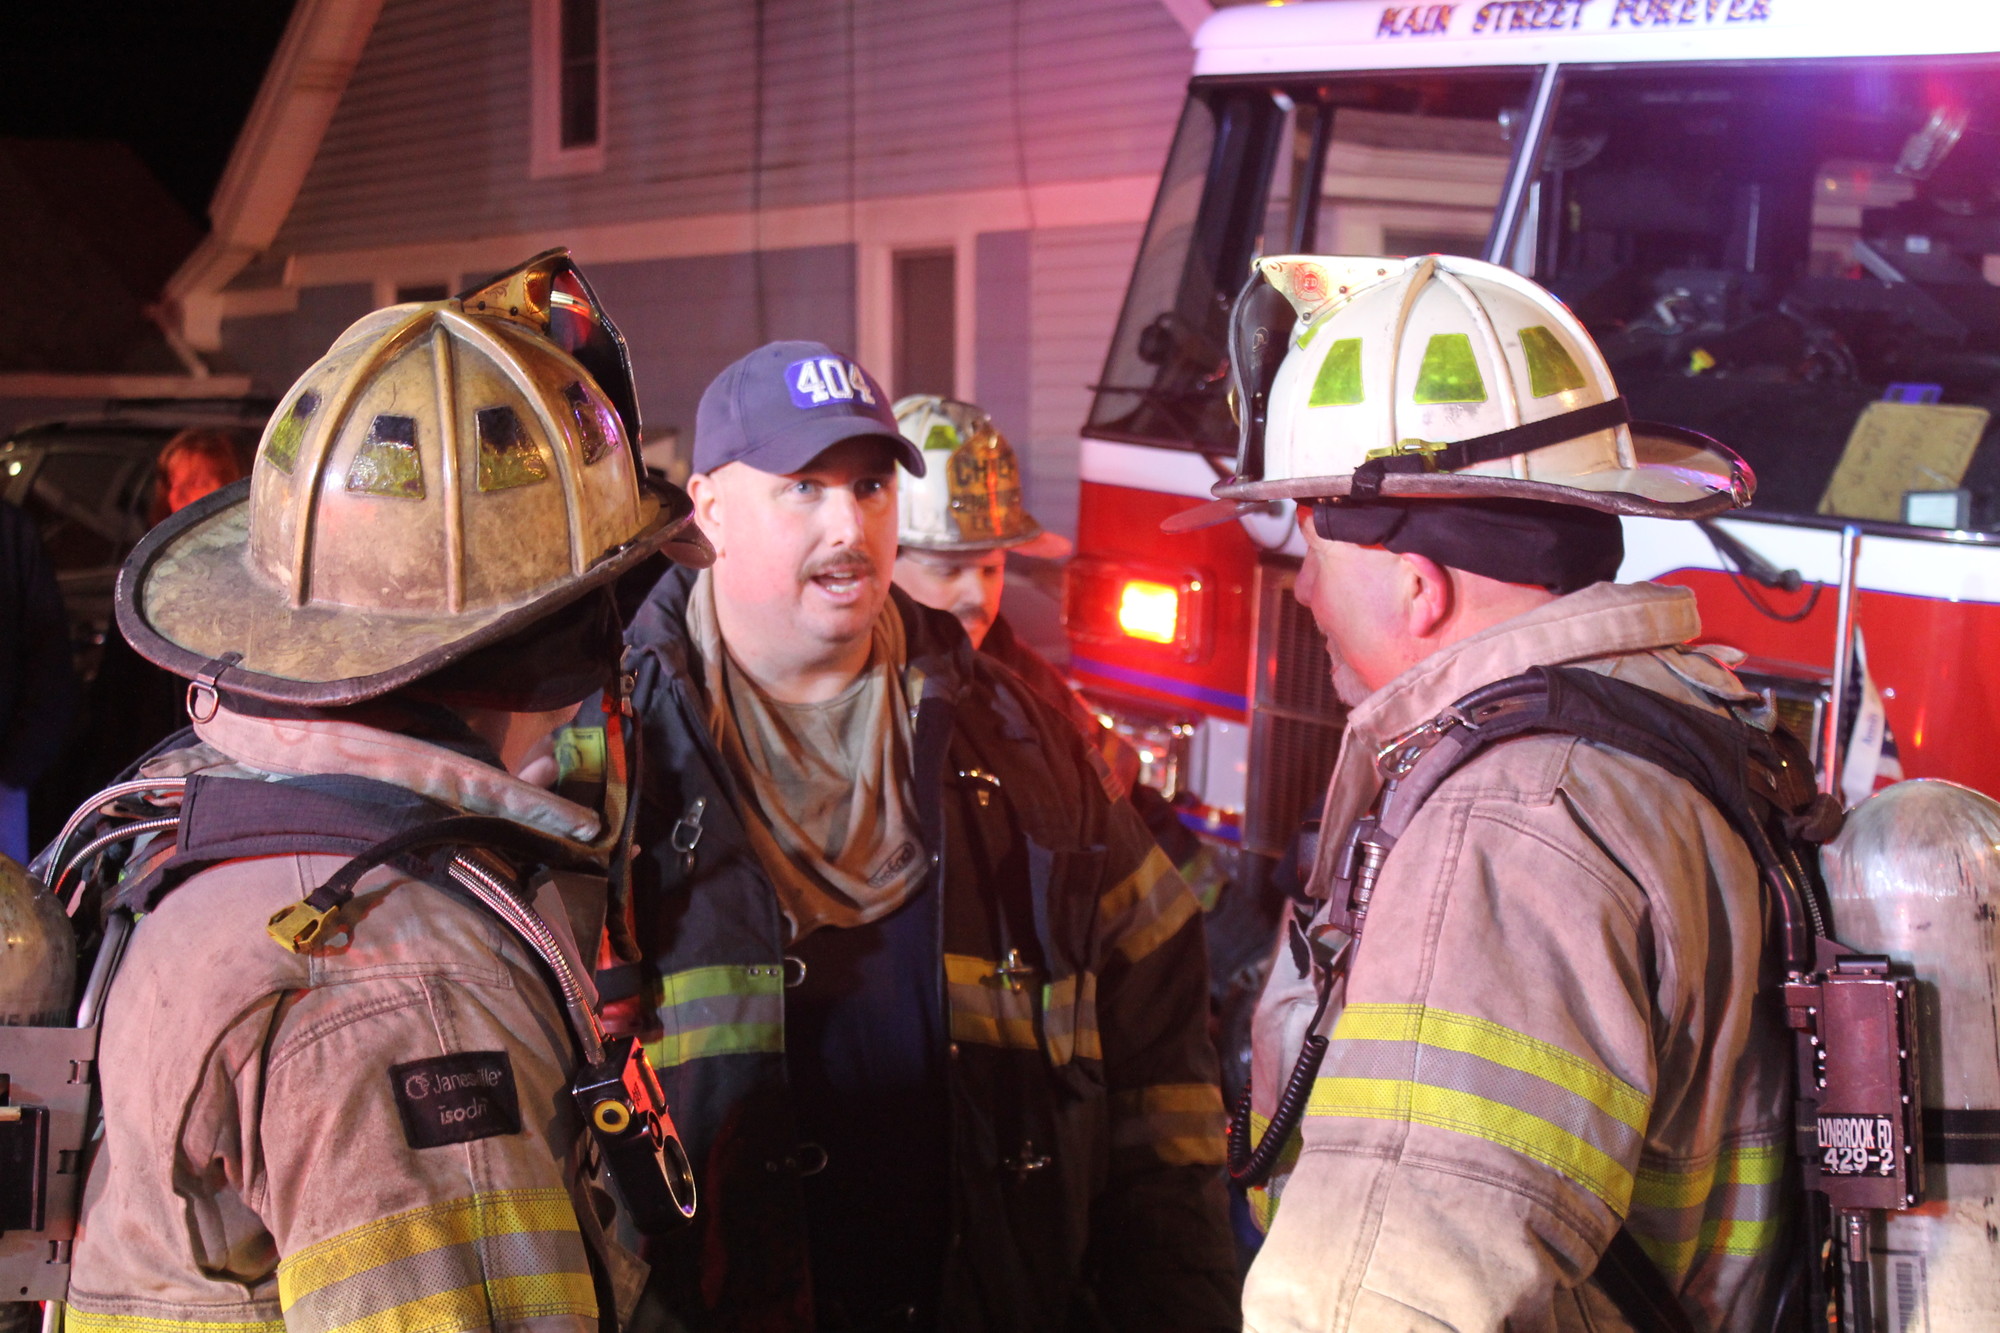 First Chief Gene Torborg was in command at the Ocean Avenue fire.